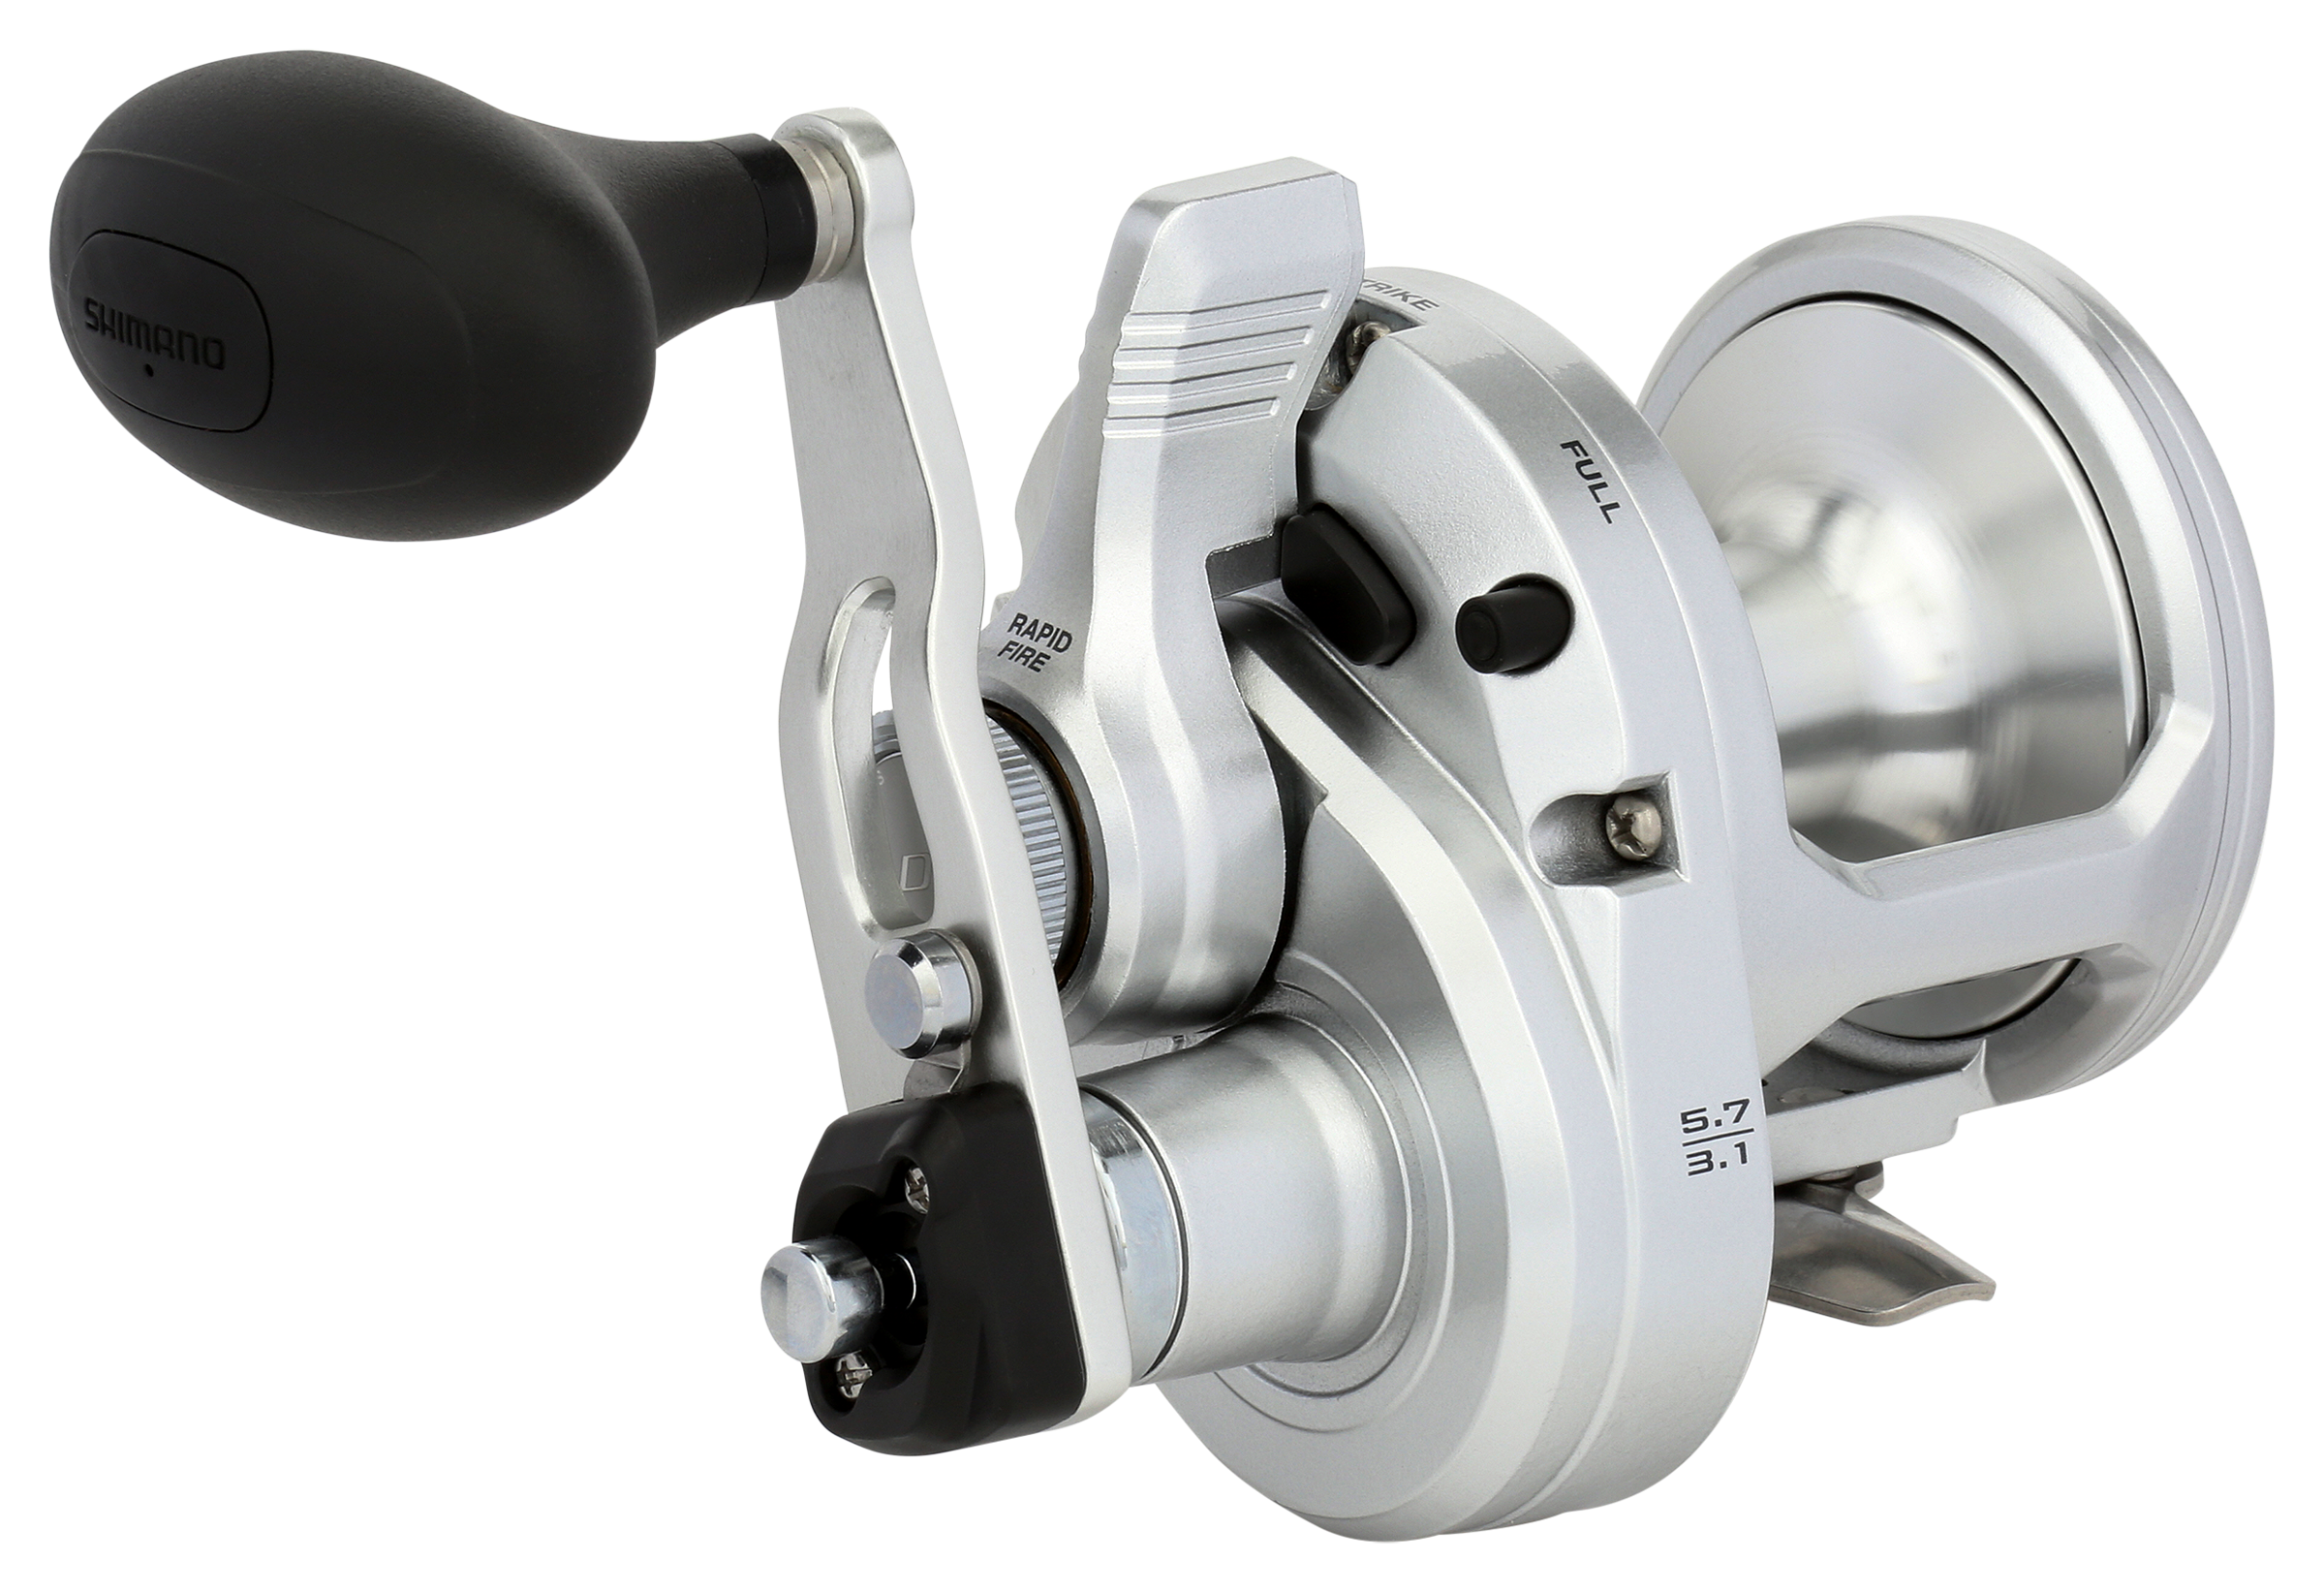 2022 New Speed Ratio: 3.1:1 Closed Bow Fishing Reel Spincast Reels